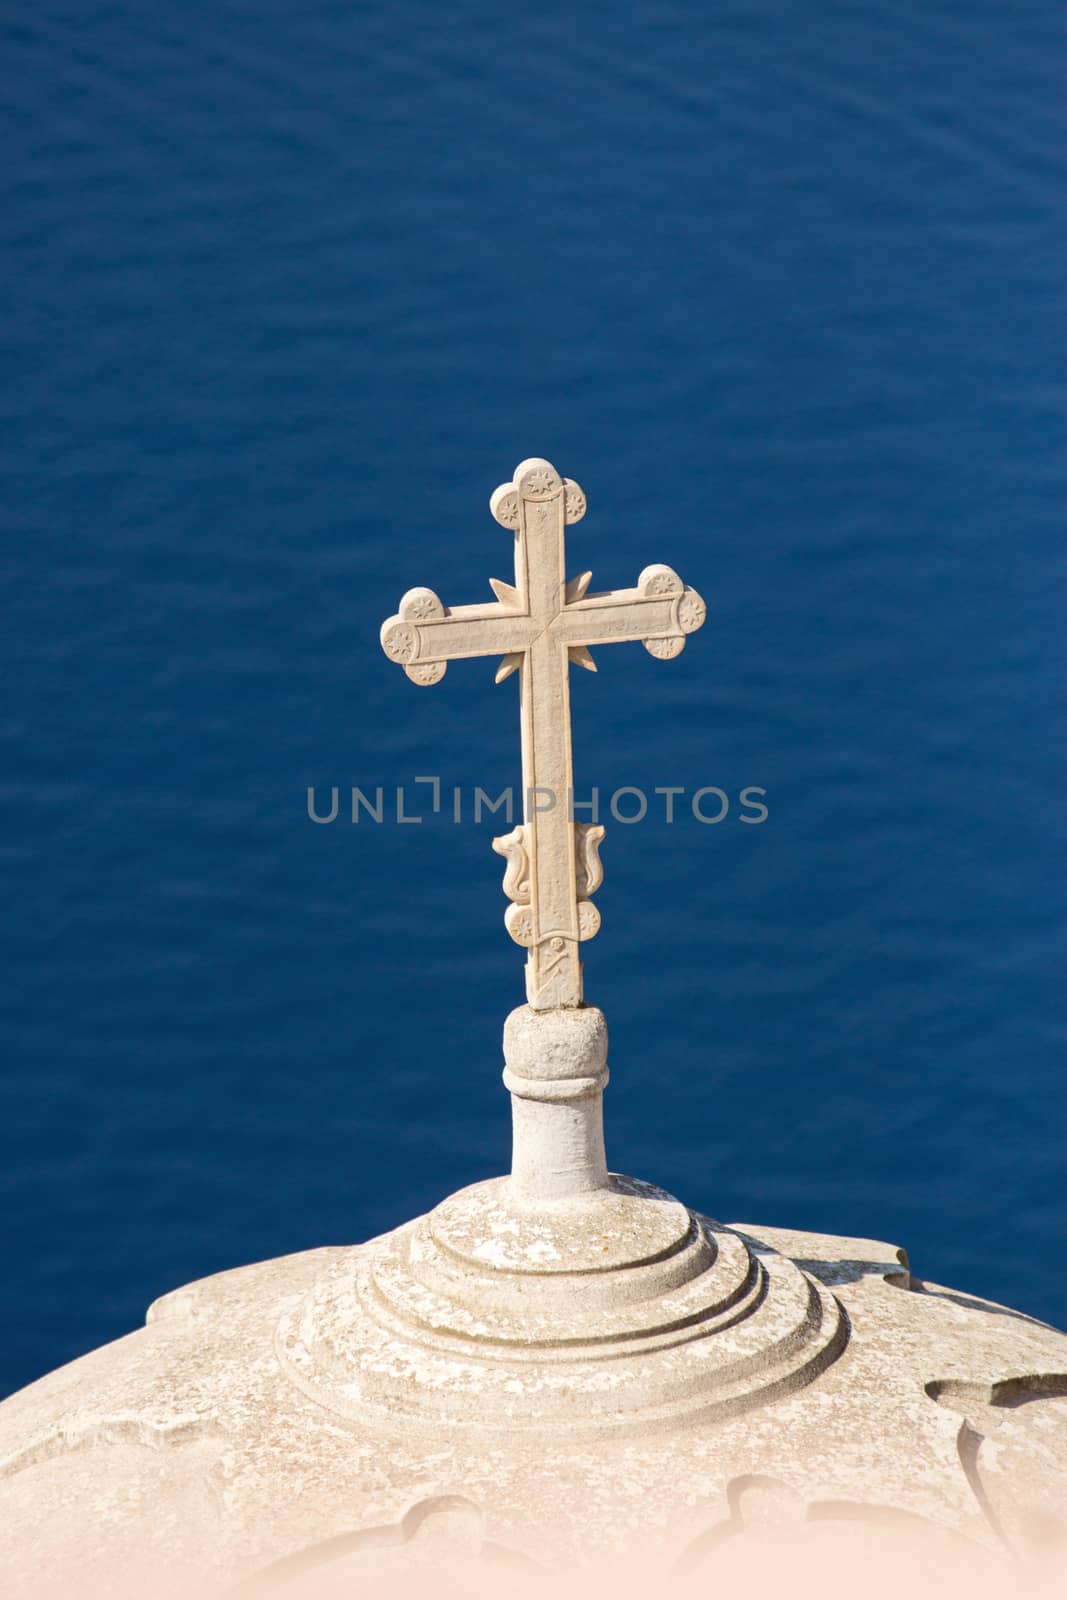 A roof of a church with a cross high up over the mediterranean sea, seen on Santorini island